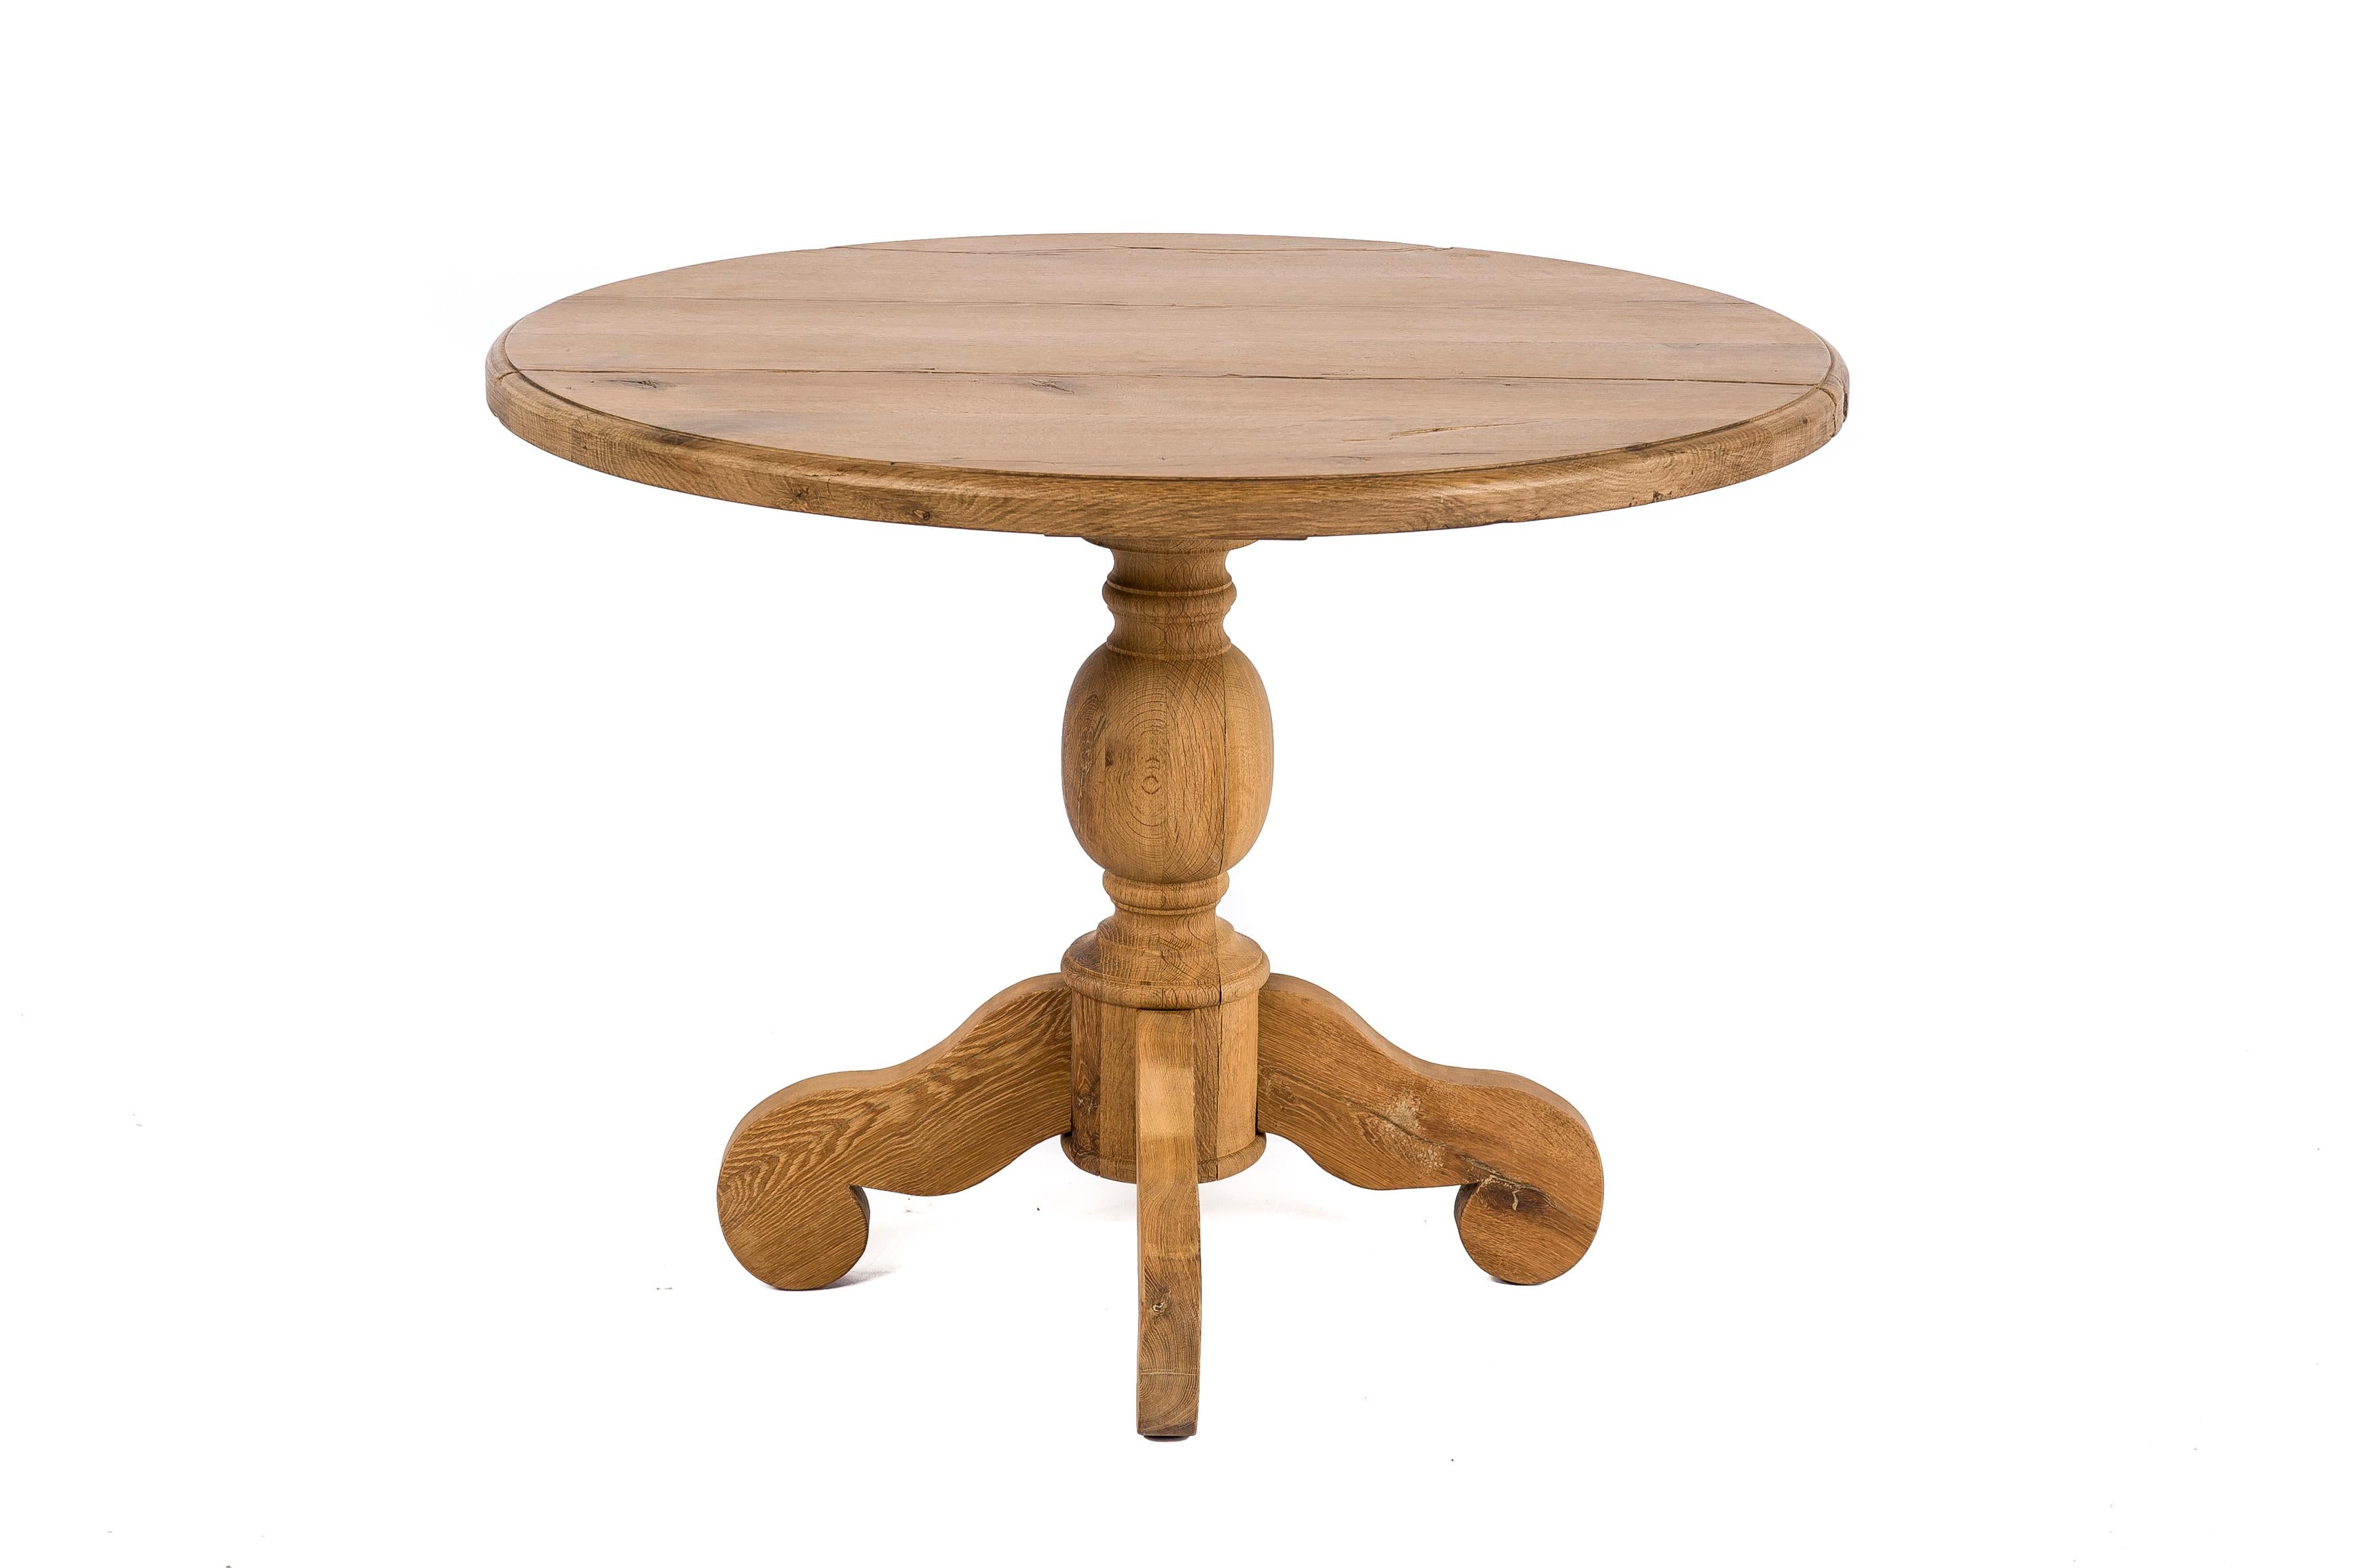 This round table has been made in our workshop by our experienced and skilled craftsmen. 
The table has a rustic top with a great grain pattern and cracks. The edge has a bullnose profile. 
It stands on a massive turned column on four scrolled